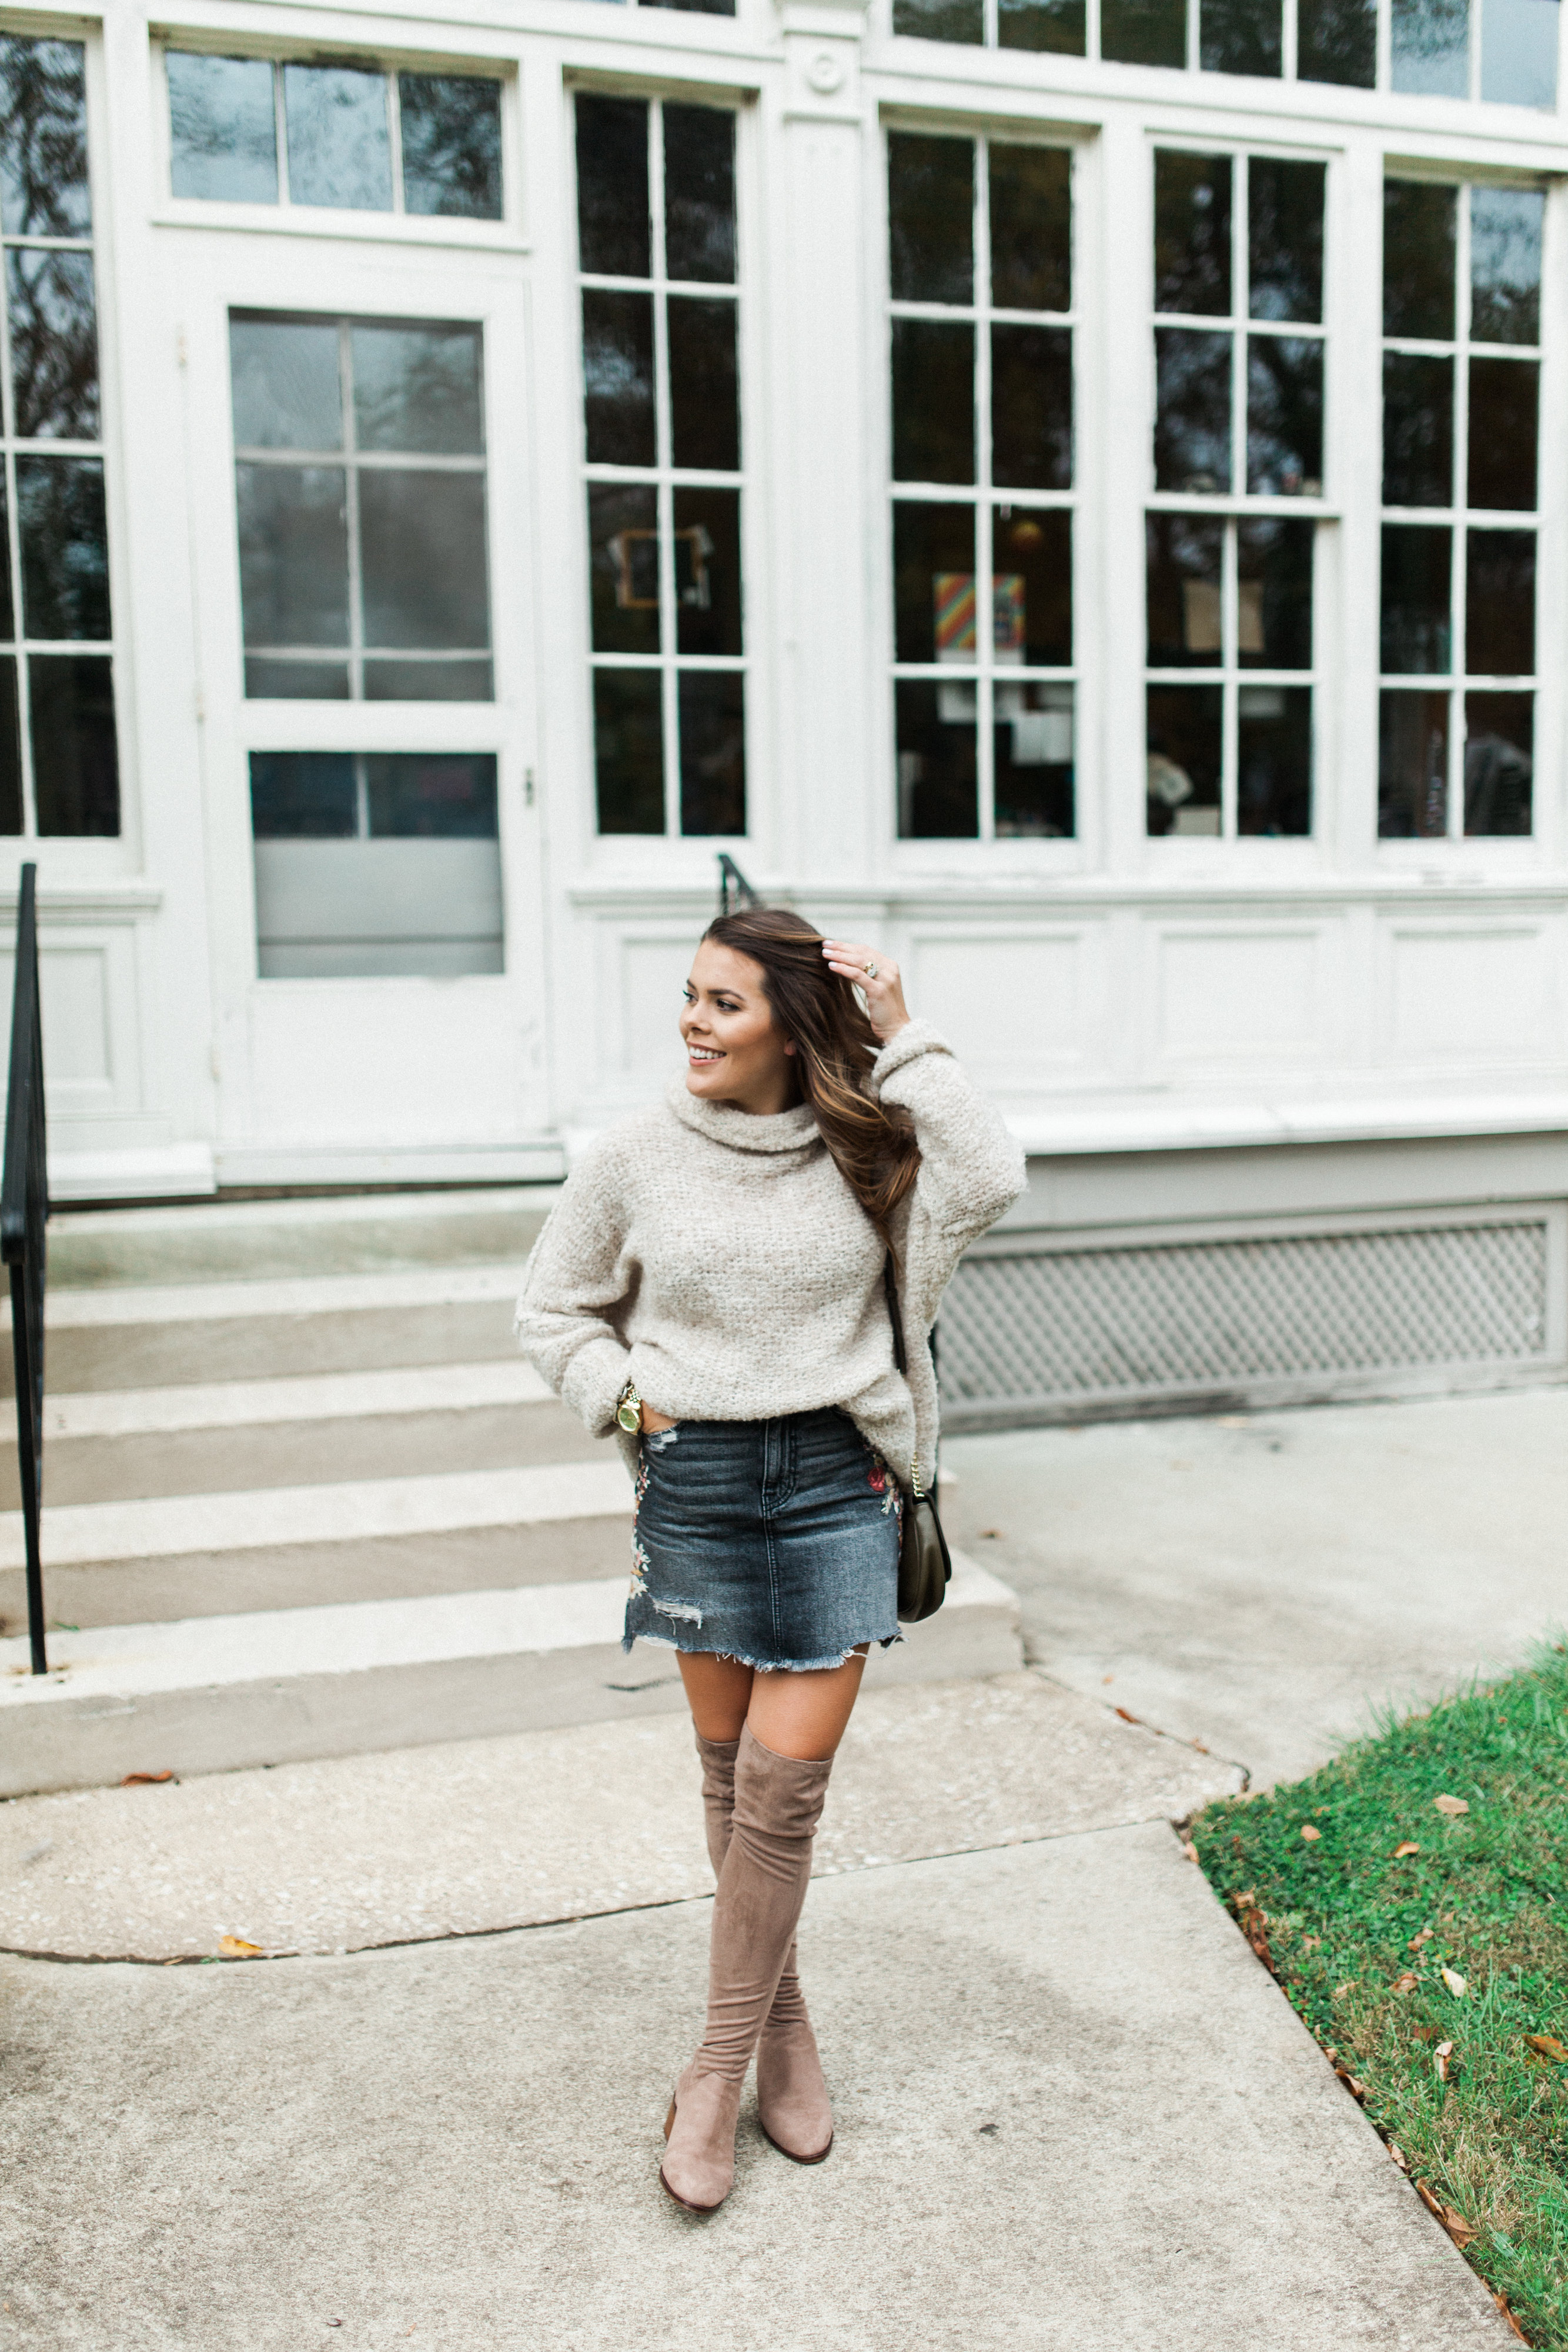 Embroidered Denim Skirt for fall / fall outfit idea 